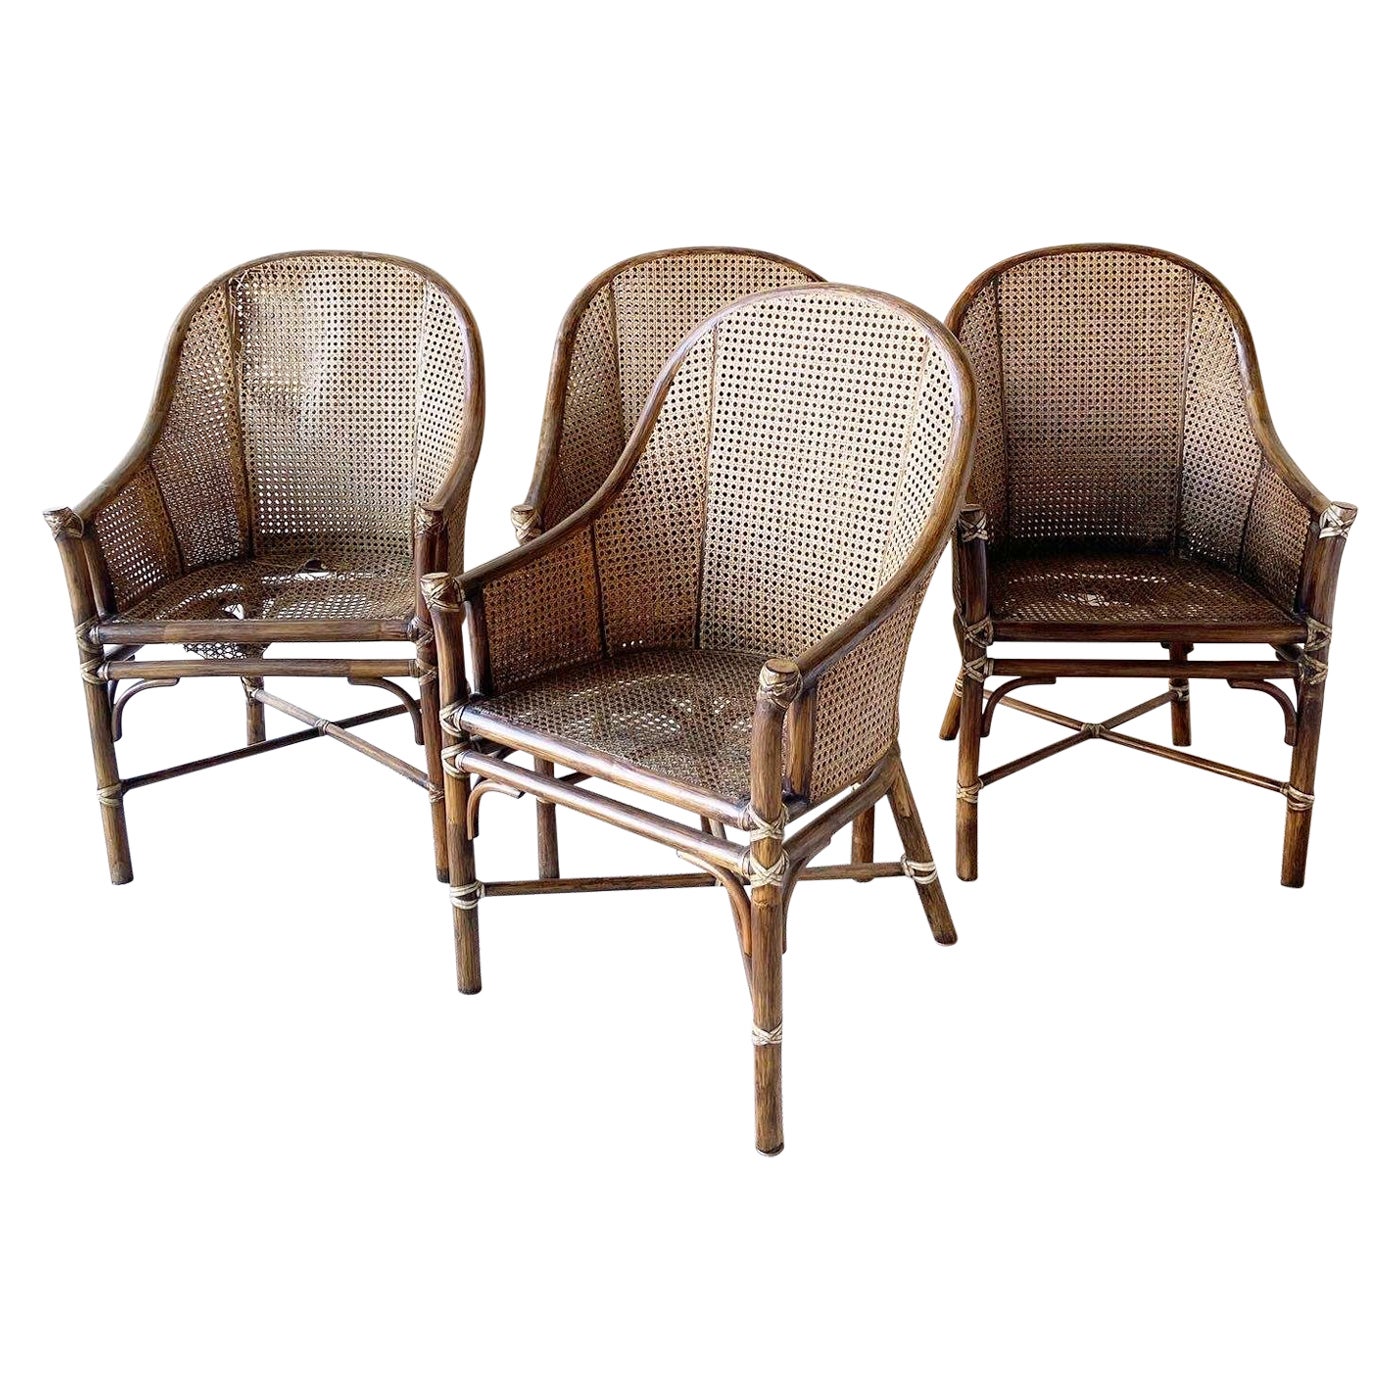 Bohemian Bamboo and Cane Arm Chairs by McGuire - Set of 4 For Sale